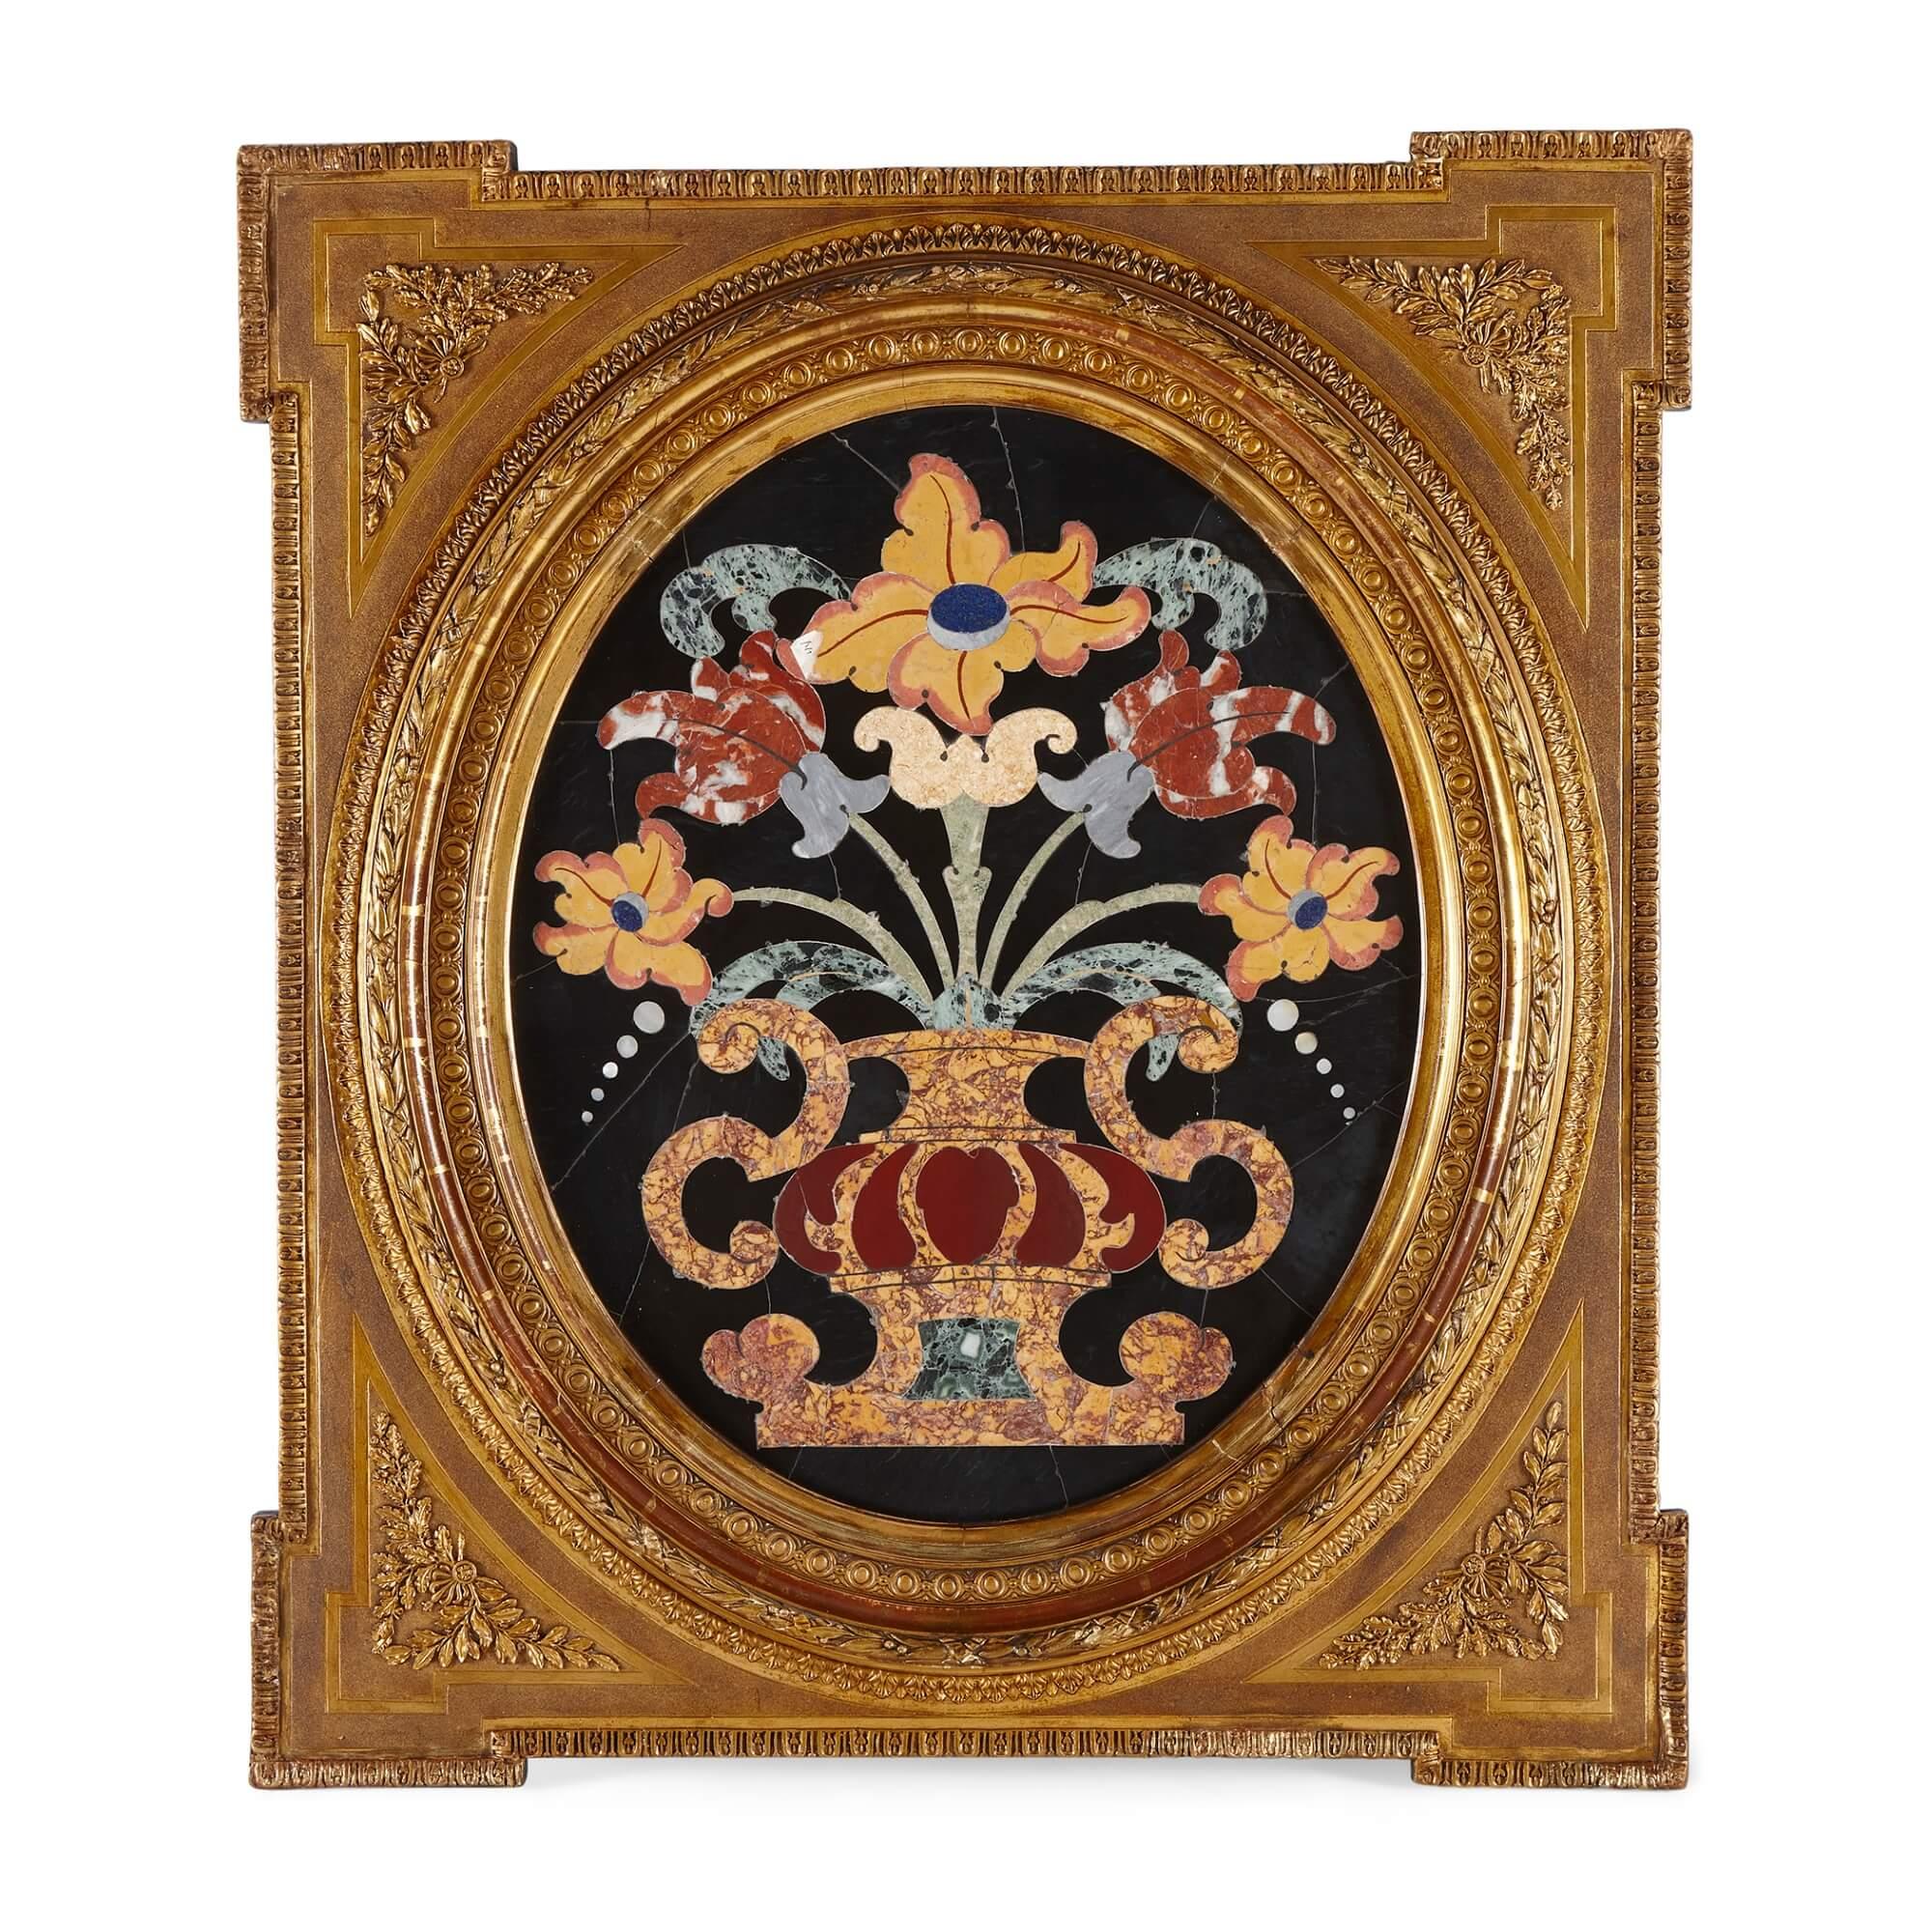 A pair of very fine, large Italian Pietra Dura marquetry panels
Italian, 19th century
Measures: Panels: height 64cm, width 53cm, depth 2cm
Frames: height 88cm, width 77cm, depth 6cm

Comprising black marble panels of oval form, set with semi